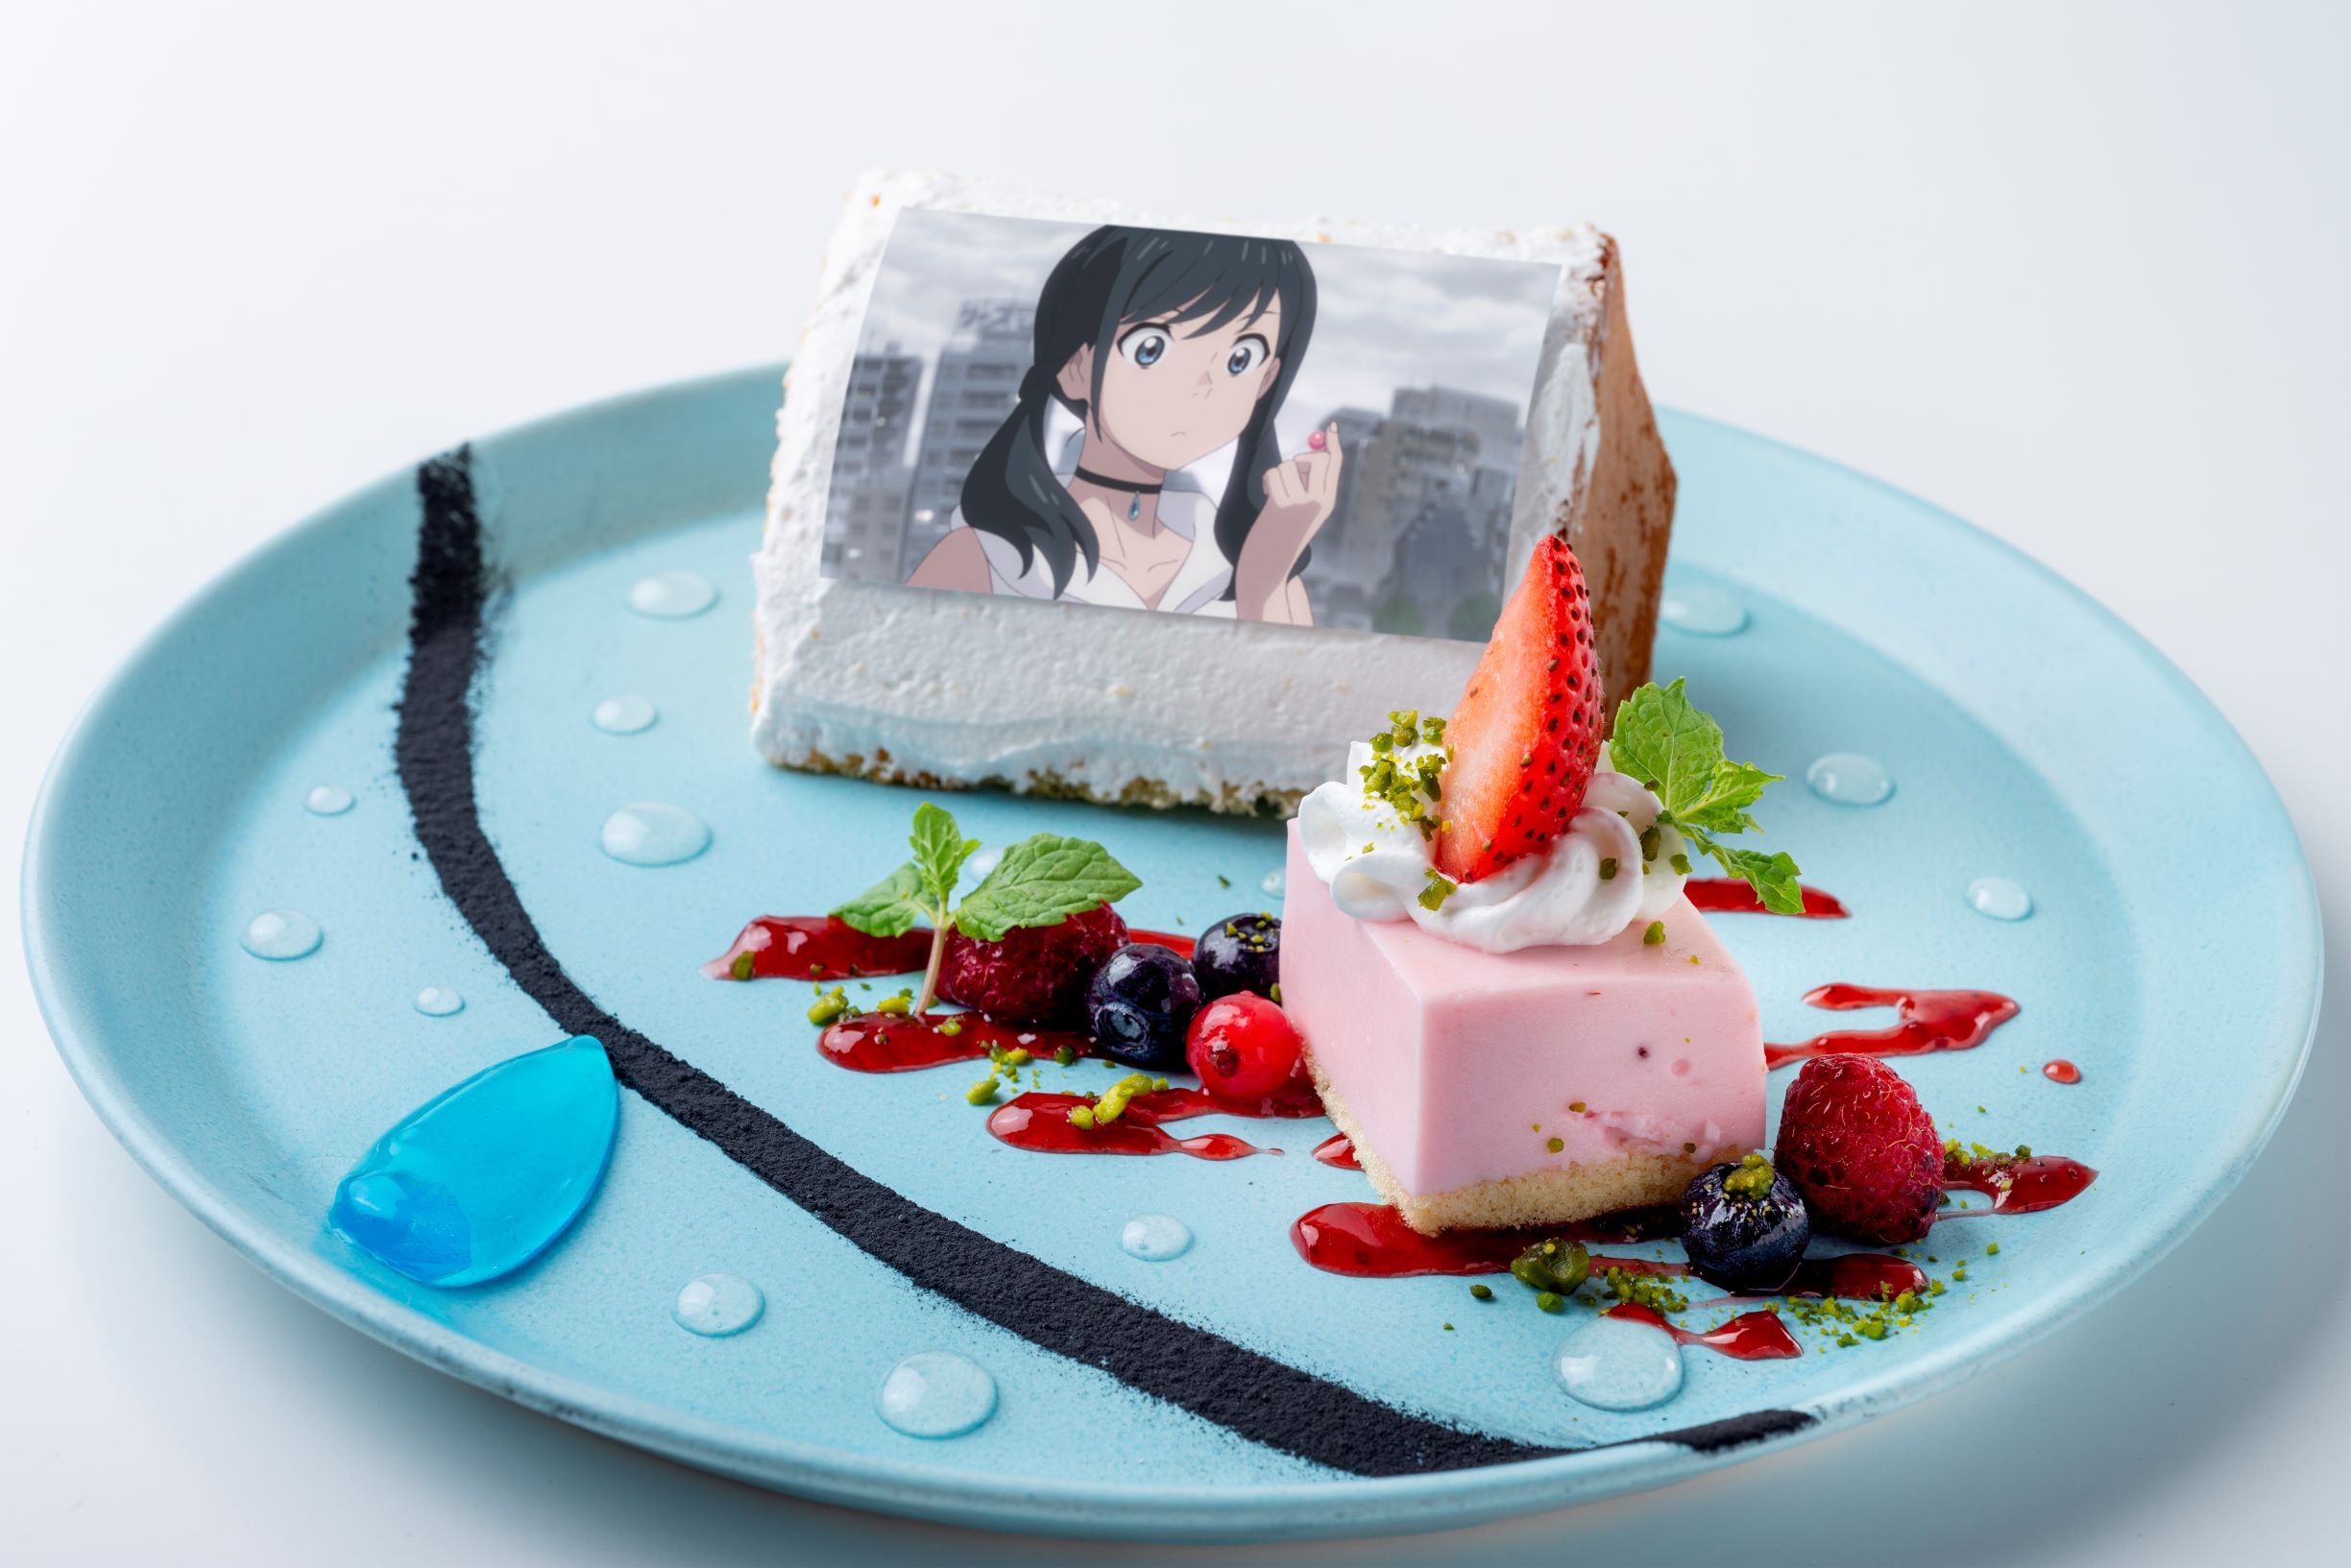 Your Name Kimi no Na wa popup themed cafes in Tokyo Nagoya in January  2017  Japan Trends